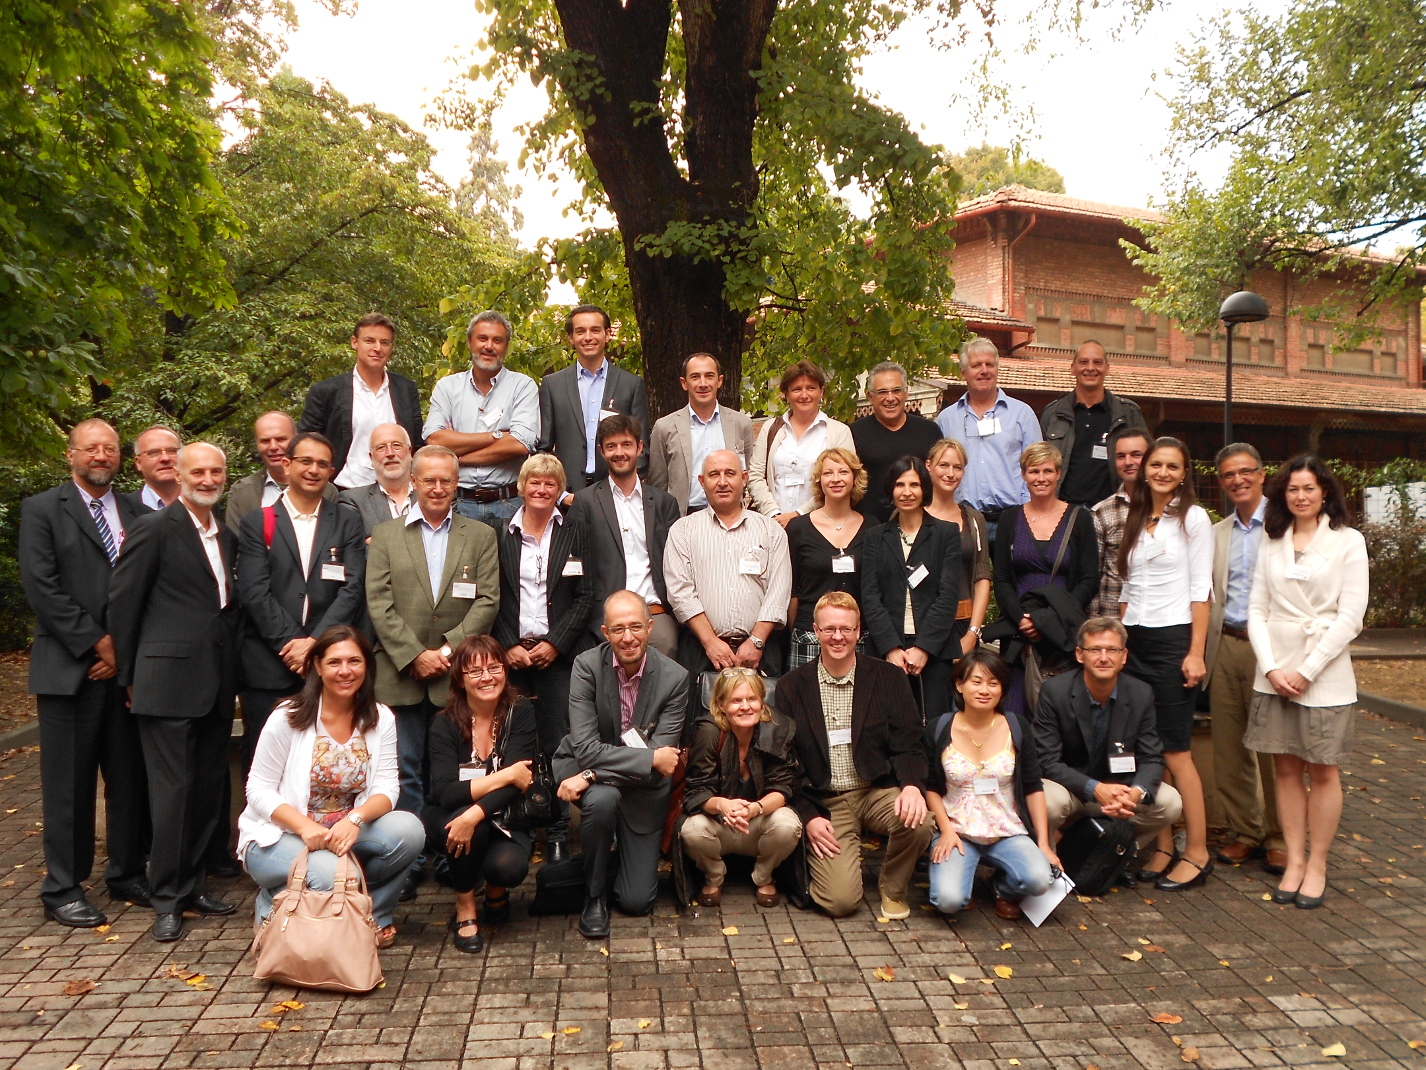 Photograph of the participants of the GENIEUR meeting in Bologna, Italy, 2012. (Please click to view full size image. To close the full size image, click on it again.)